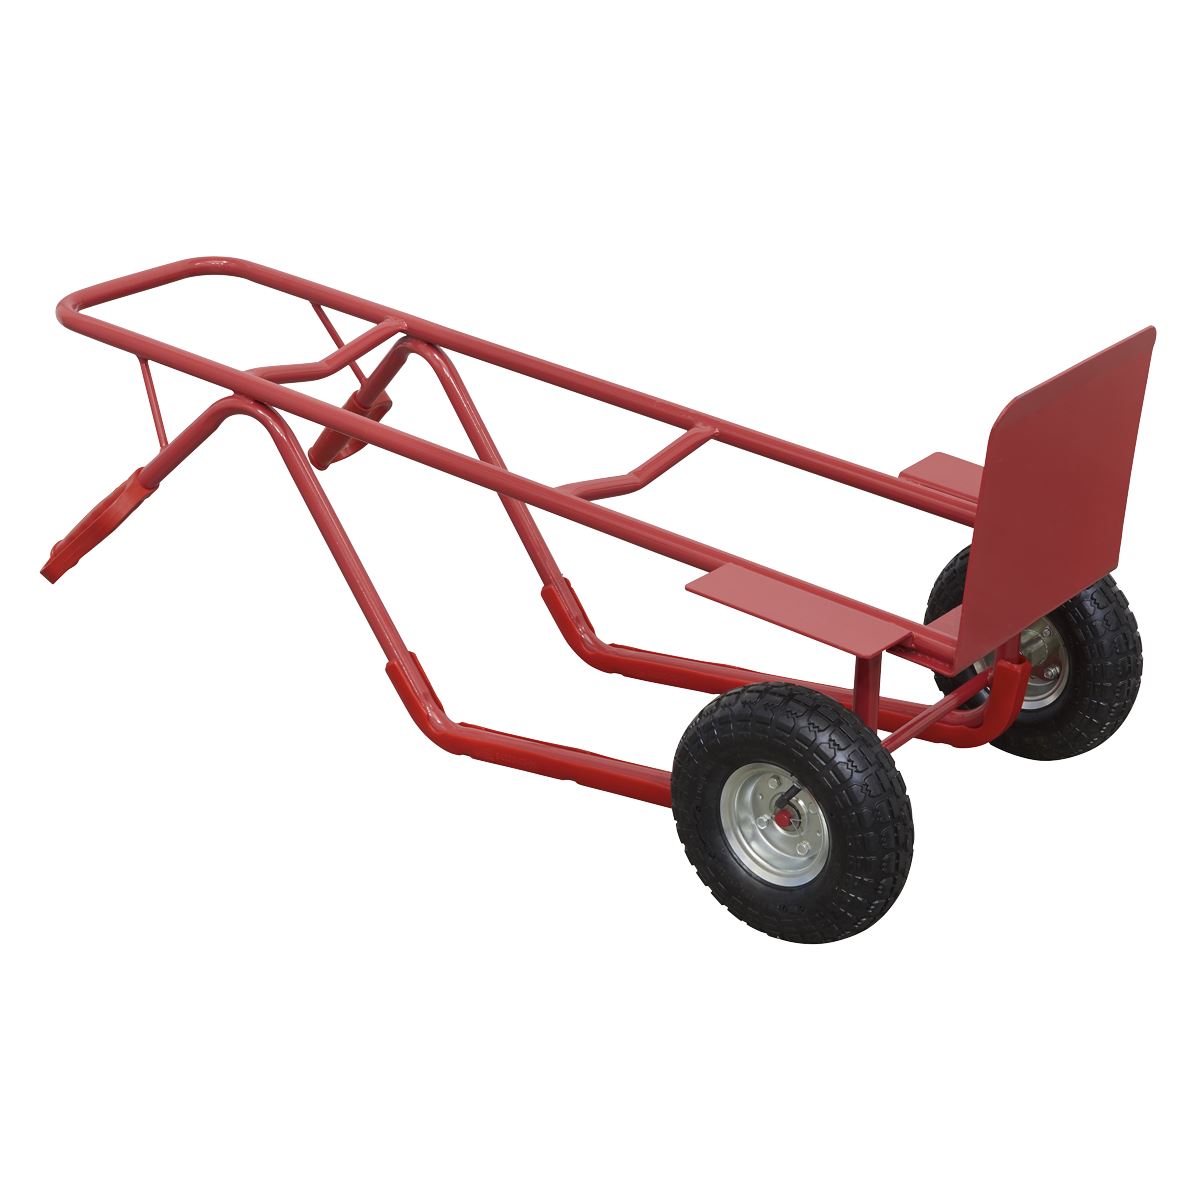 Sealey Sack Truck with Pneumatic Tyres 300kg Capacity